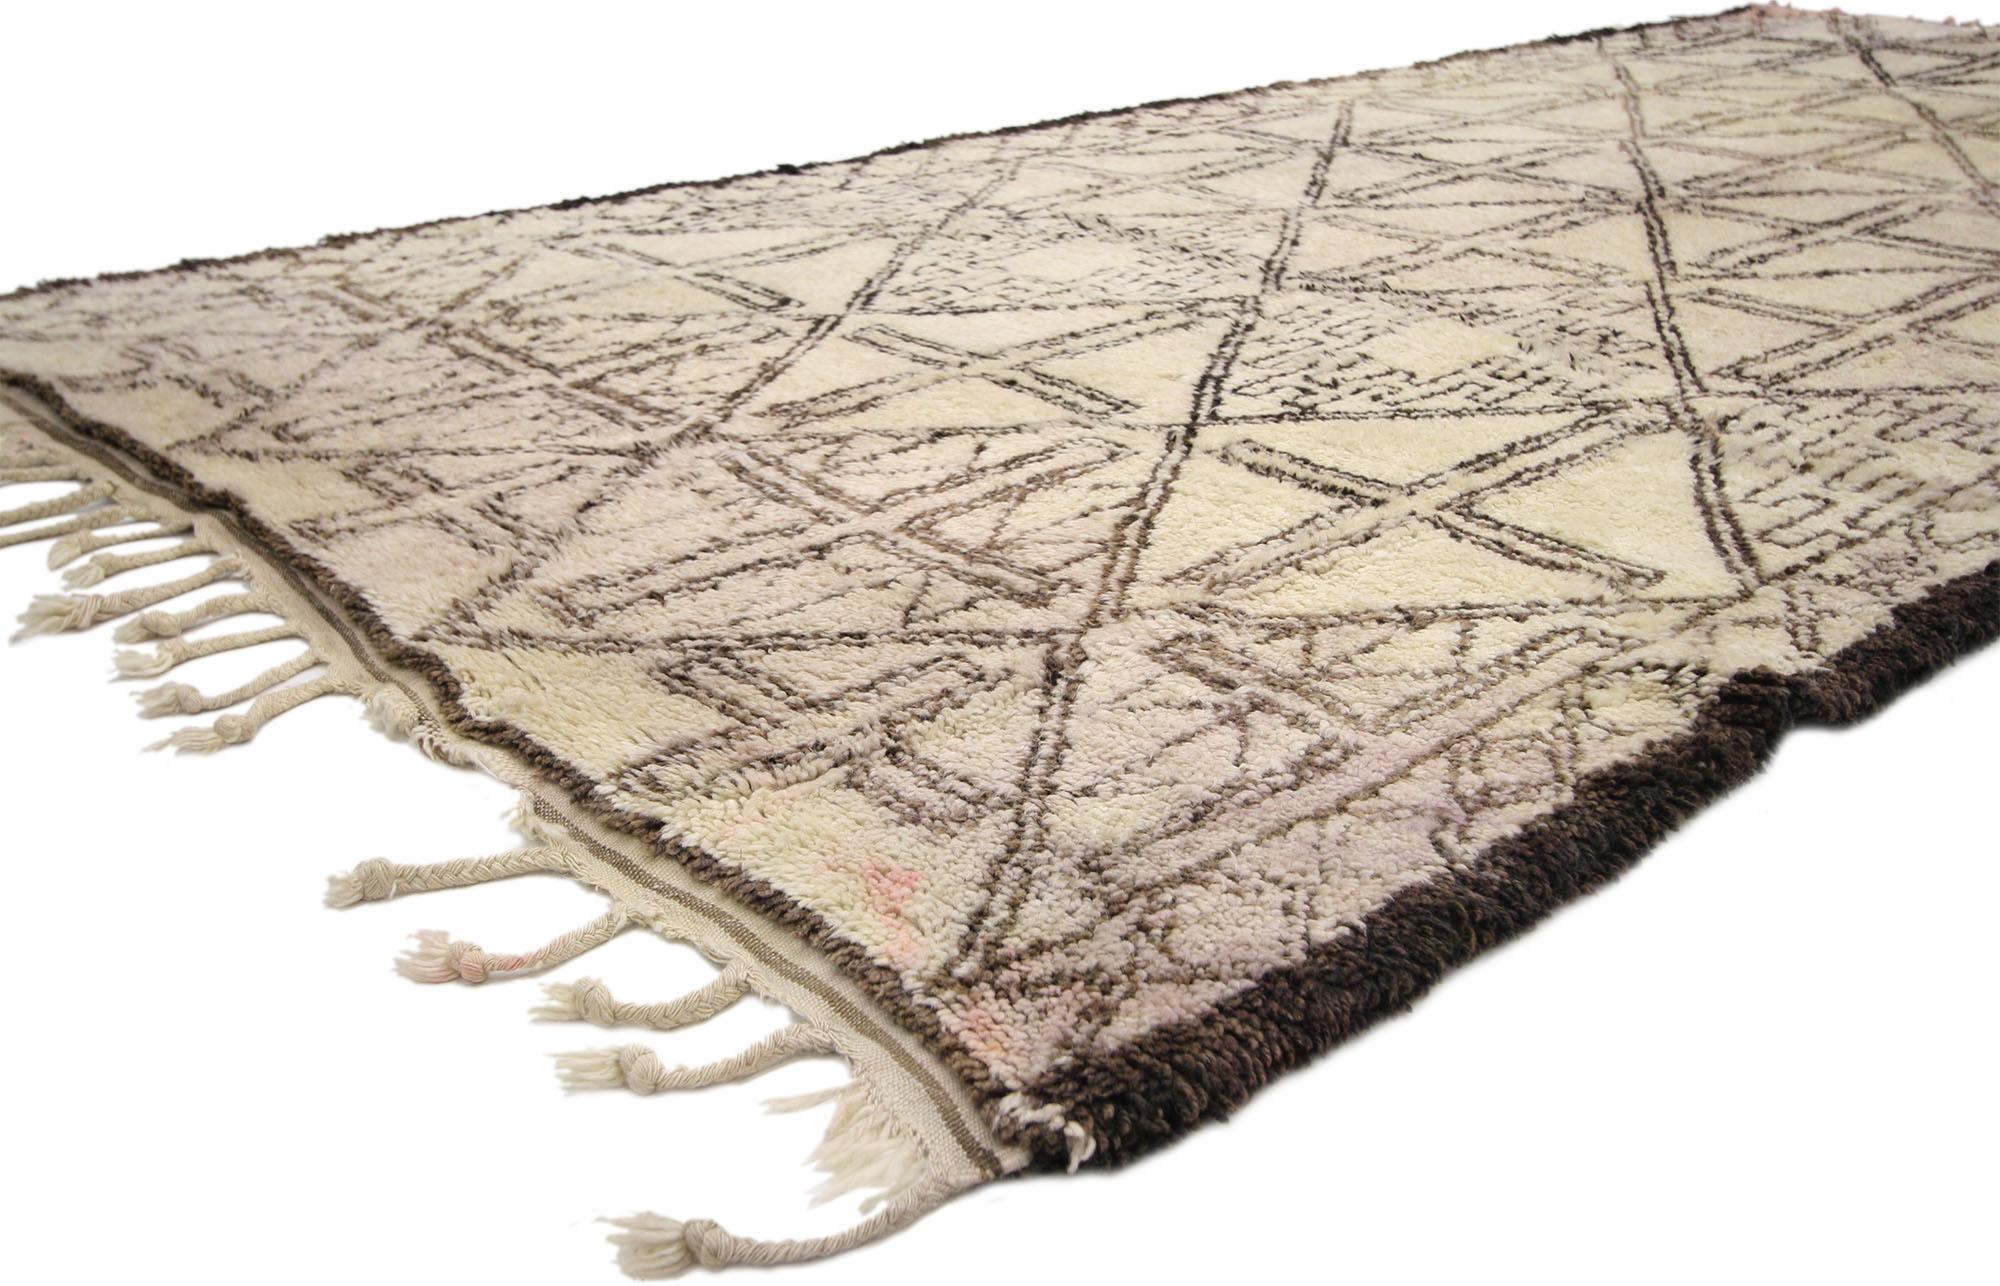 20759 Vintage Moroccan Rug with Mid-Century Modern Style, Beni M'Guild Moroccan Rug. A happy marriage of Hygge vibes and Mid-Century Modern style are created in this perfectly plush hand knotted wool vintage Beni M'Guild rug. An all-over diamond